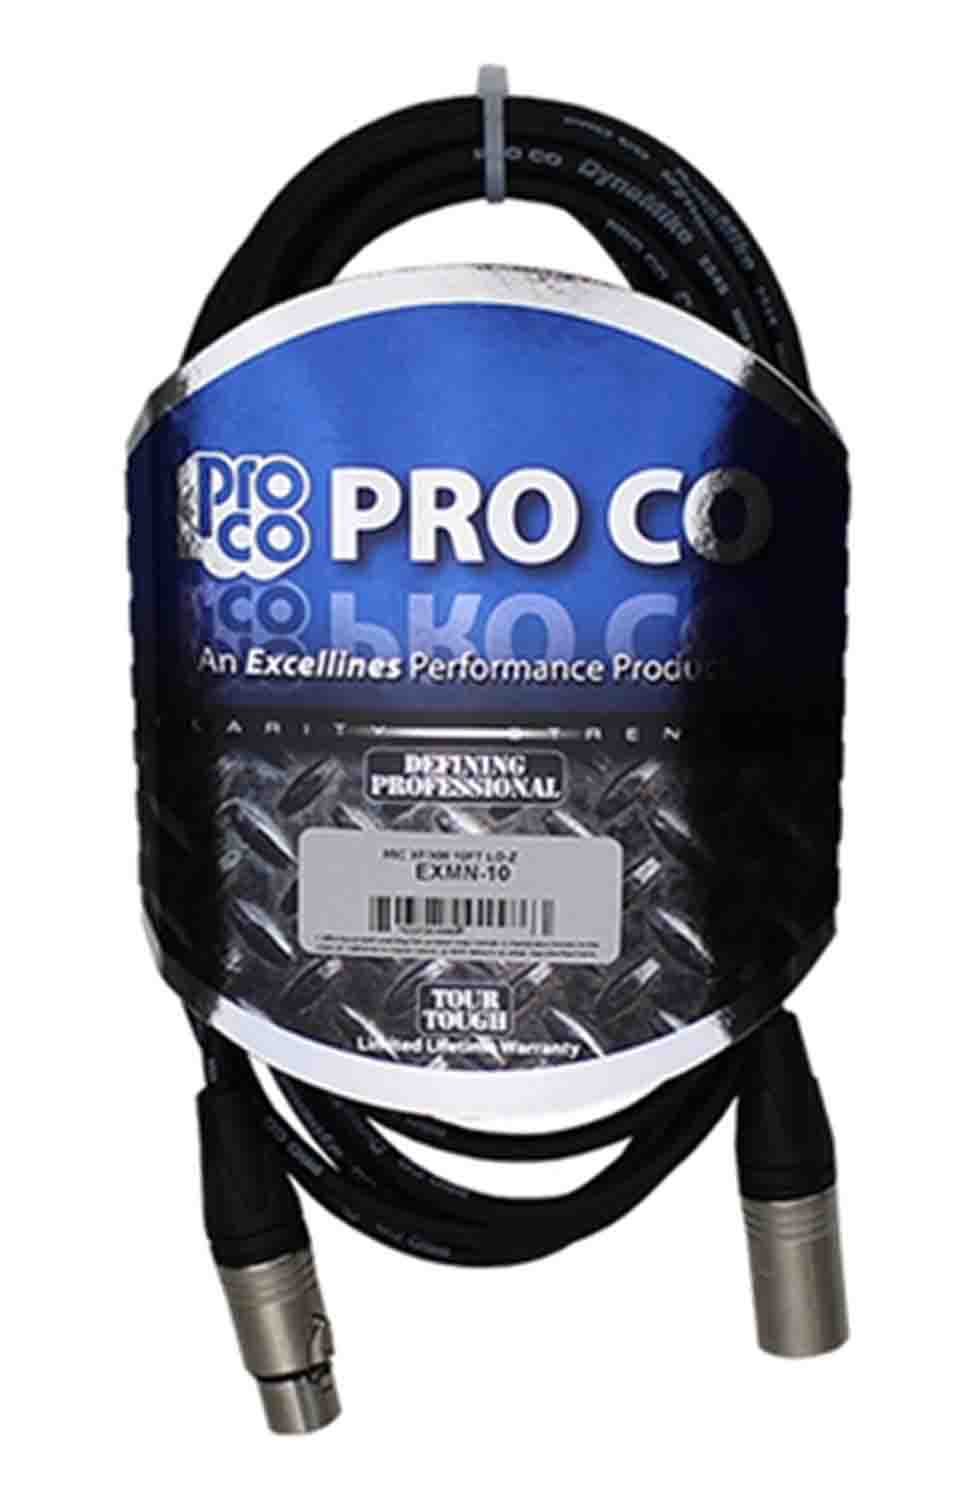 Pro Co EXMN-5, 5 Inch Excellines XLRF to XLRM Microphone Cable - Hollywood DJ